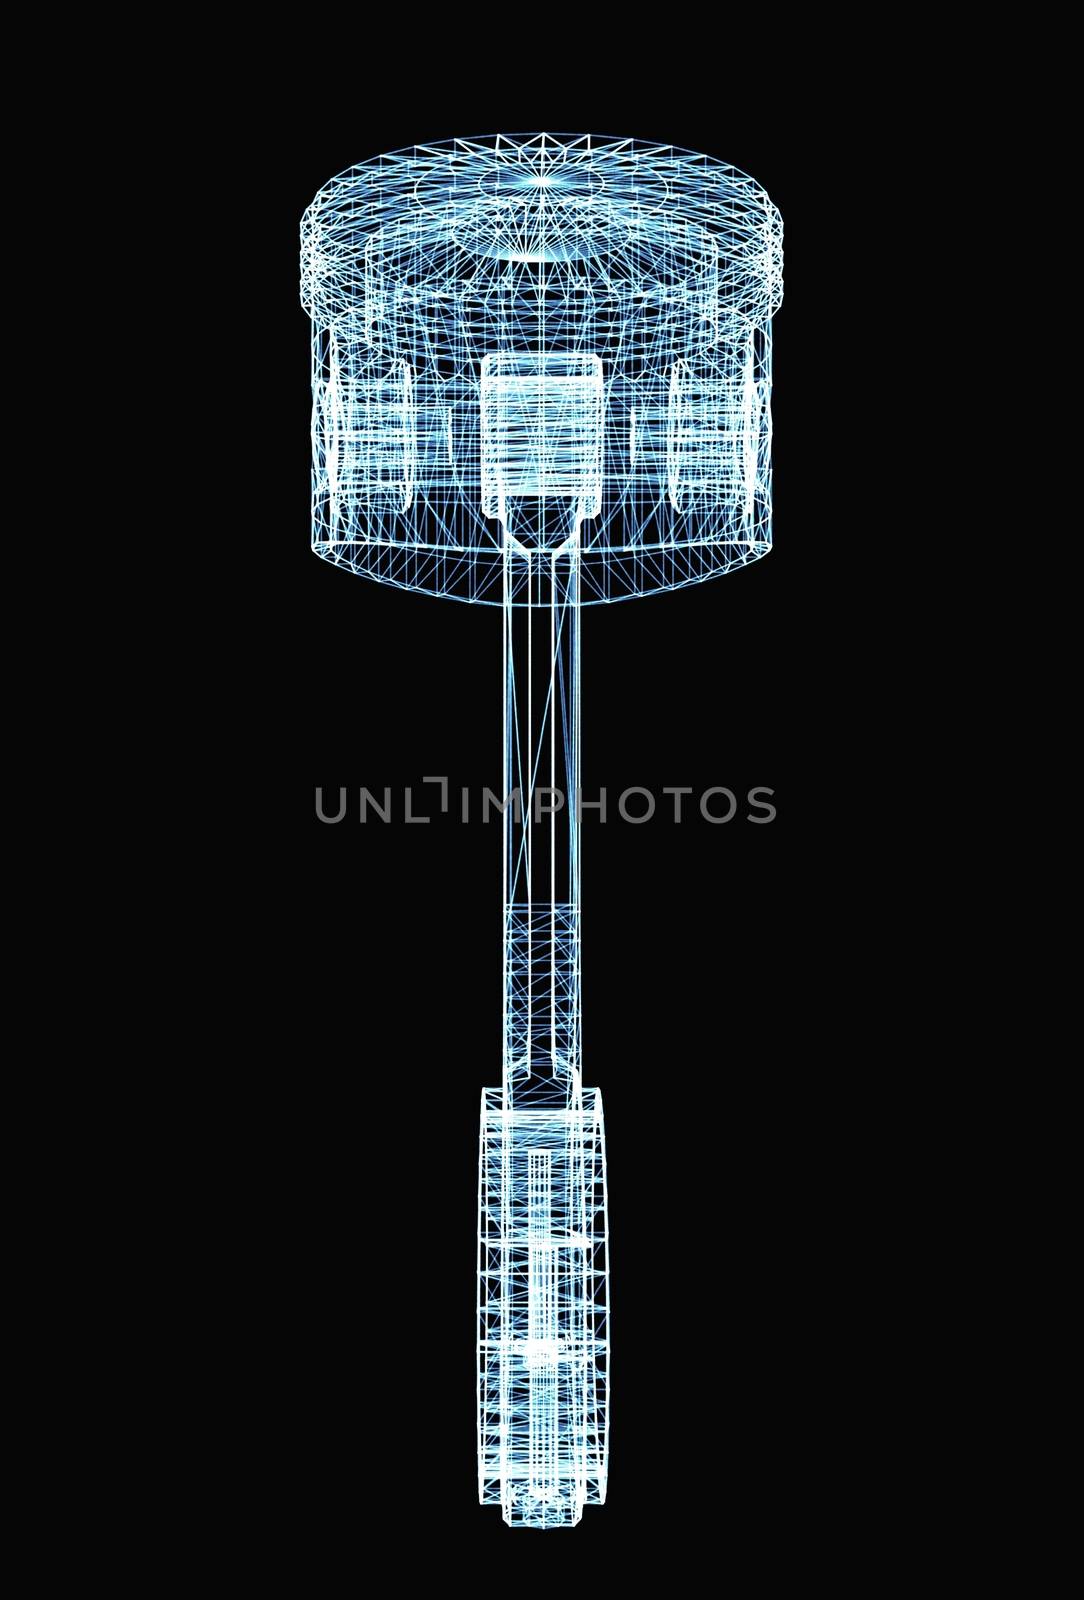 Engine piston consisting of luminous lines and dots. 3d illustration on a black background